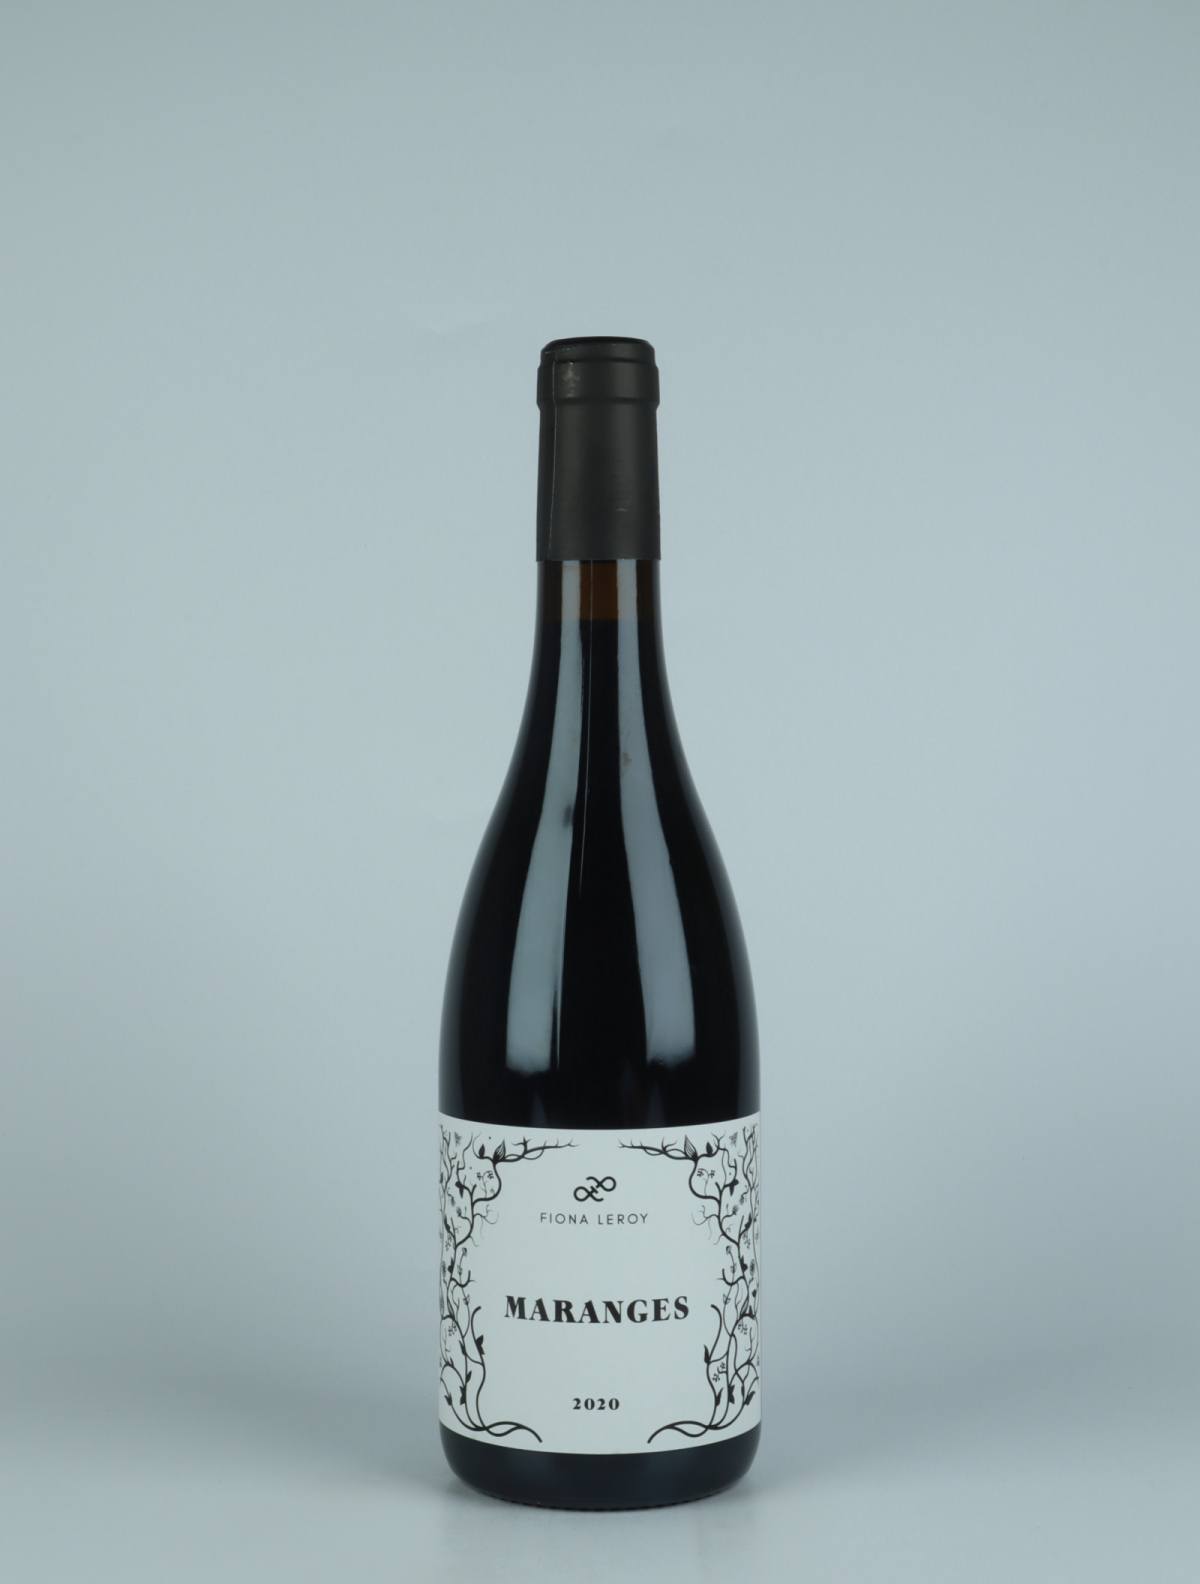 A bottle 2020 Maranges Rouge Red wine from Fiona Leroy, Burgundy in France